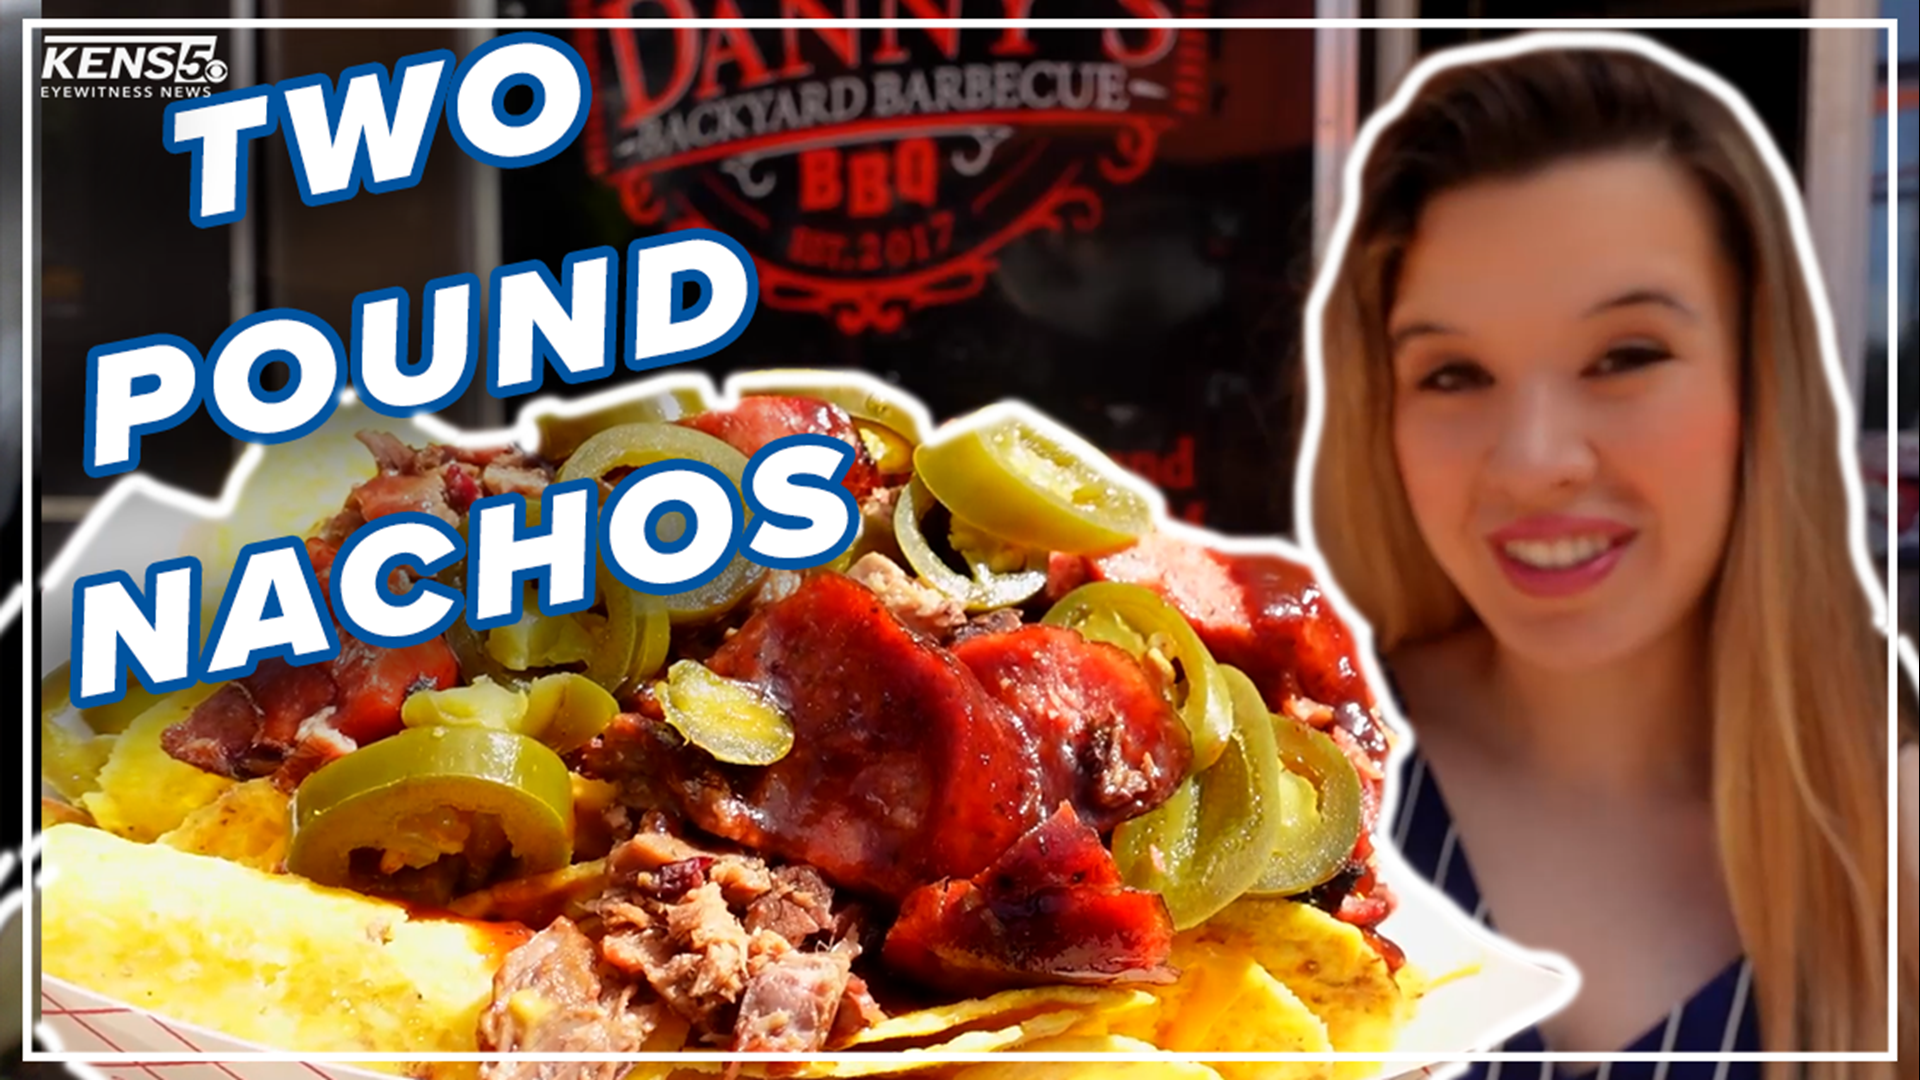 If you're looking for loaded nachos or juicy brisket, there's a food truck in San Antonio that has you covered. Lexi Hazlett takes you to Uncle Danny's Backyard BBQ.